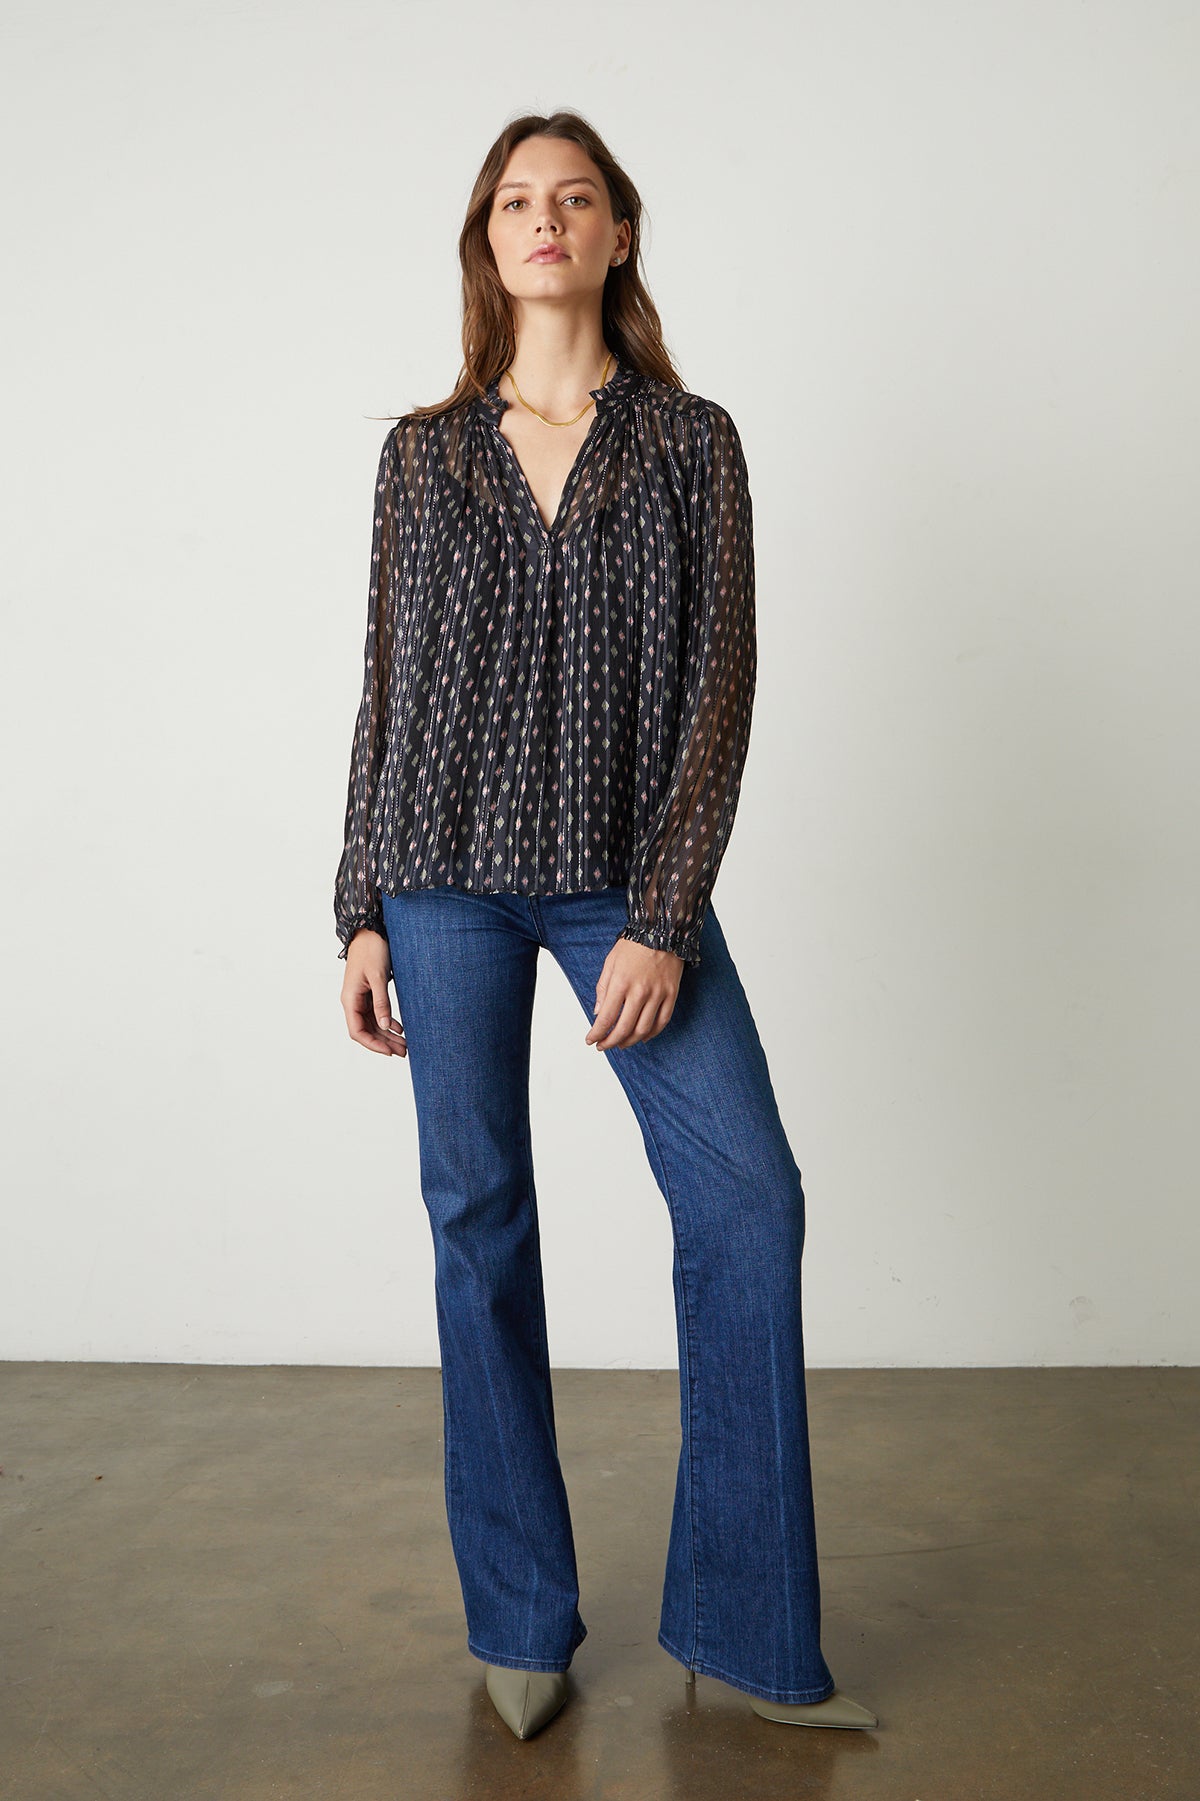   Carla Printed Lurex Stripe top in Starlit pattern with blue denim and heels full length front 